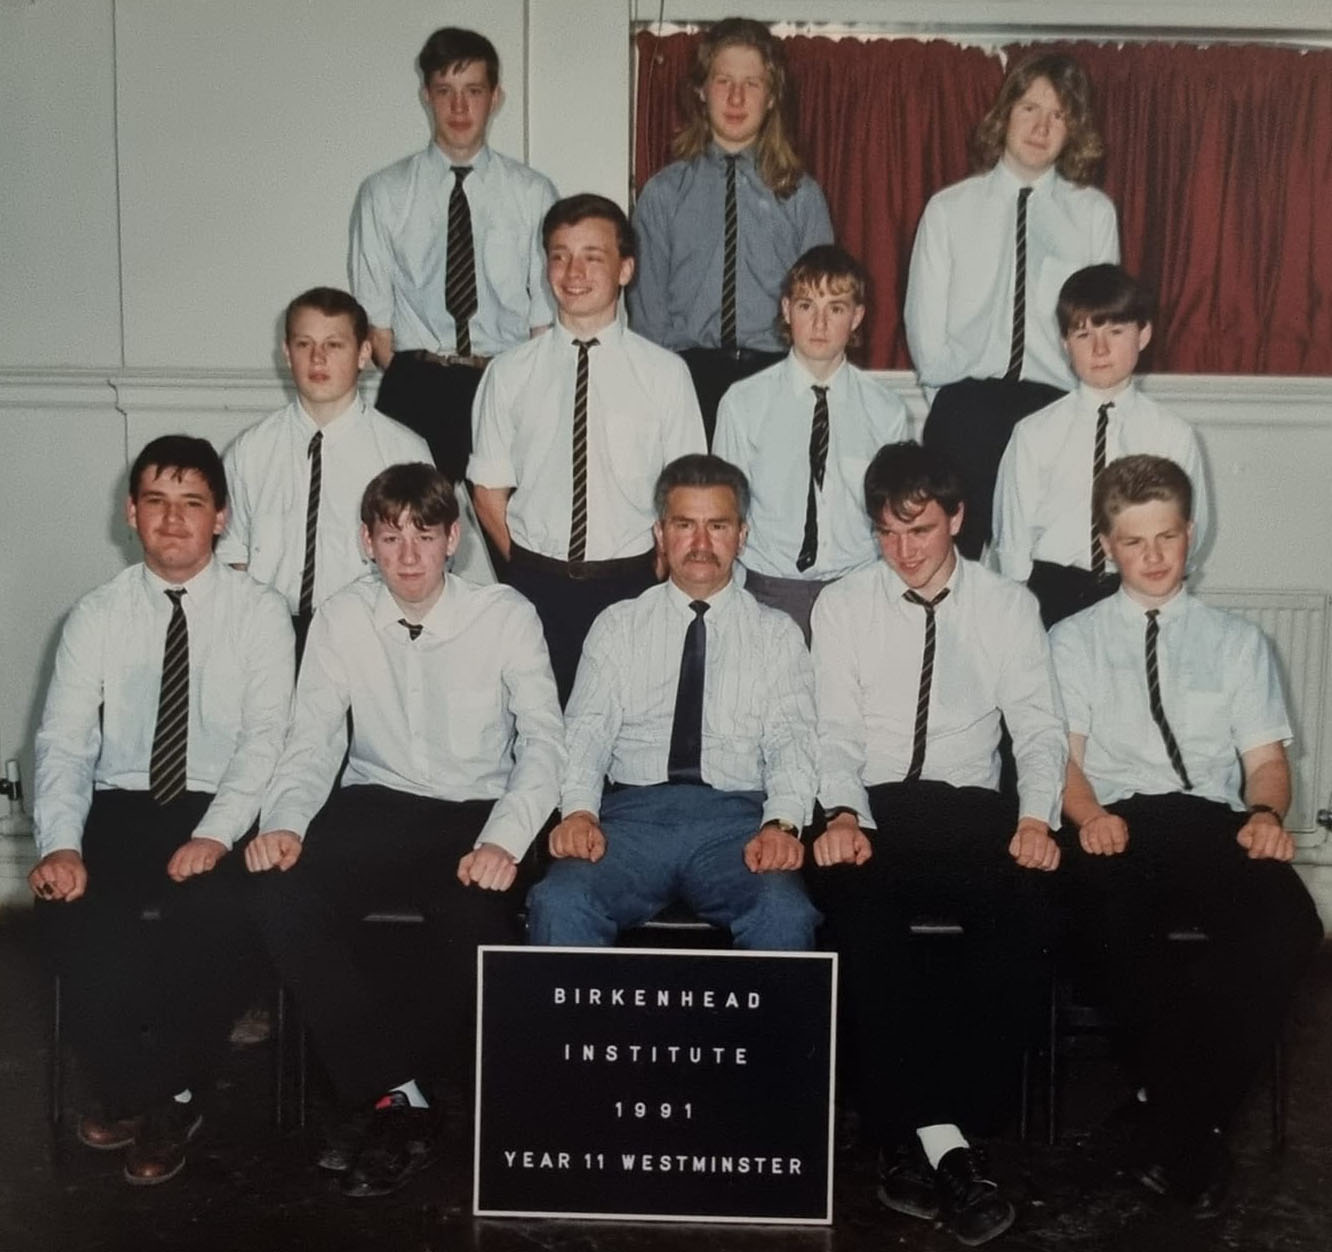 1991 Year 11 Westminster